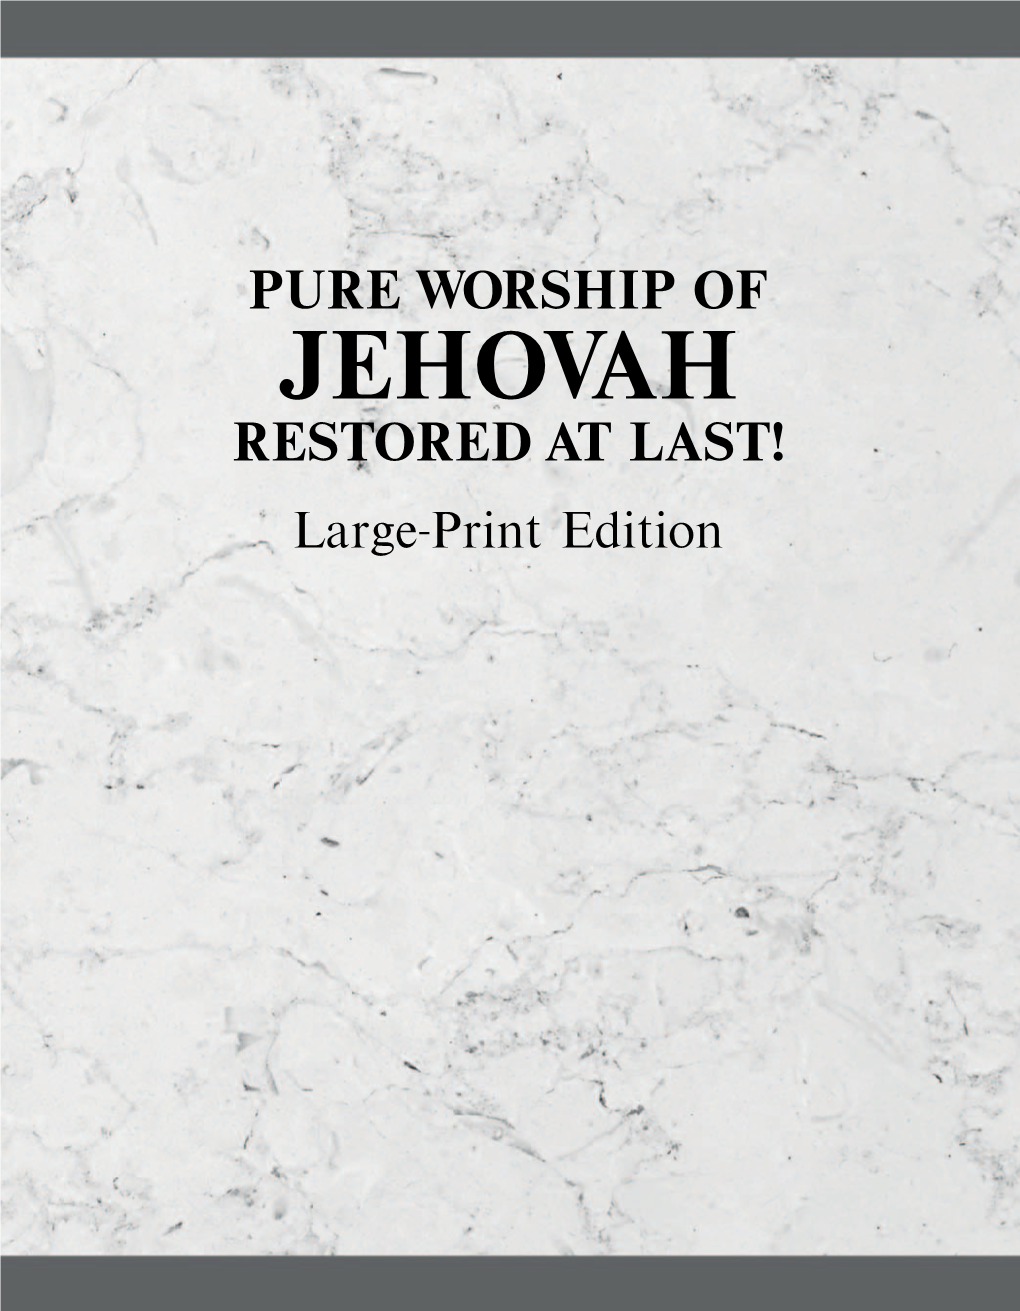 PURE WORSHIP of JEHOVAH RESTORED at LAST! Large-Print Edition